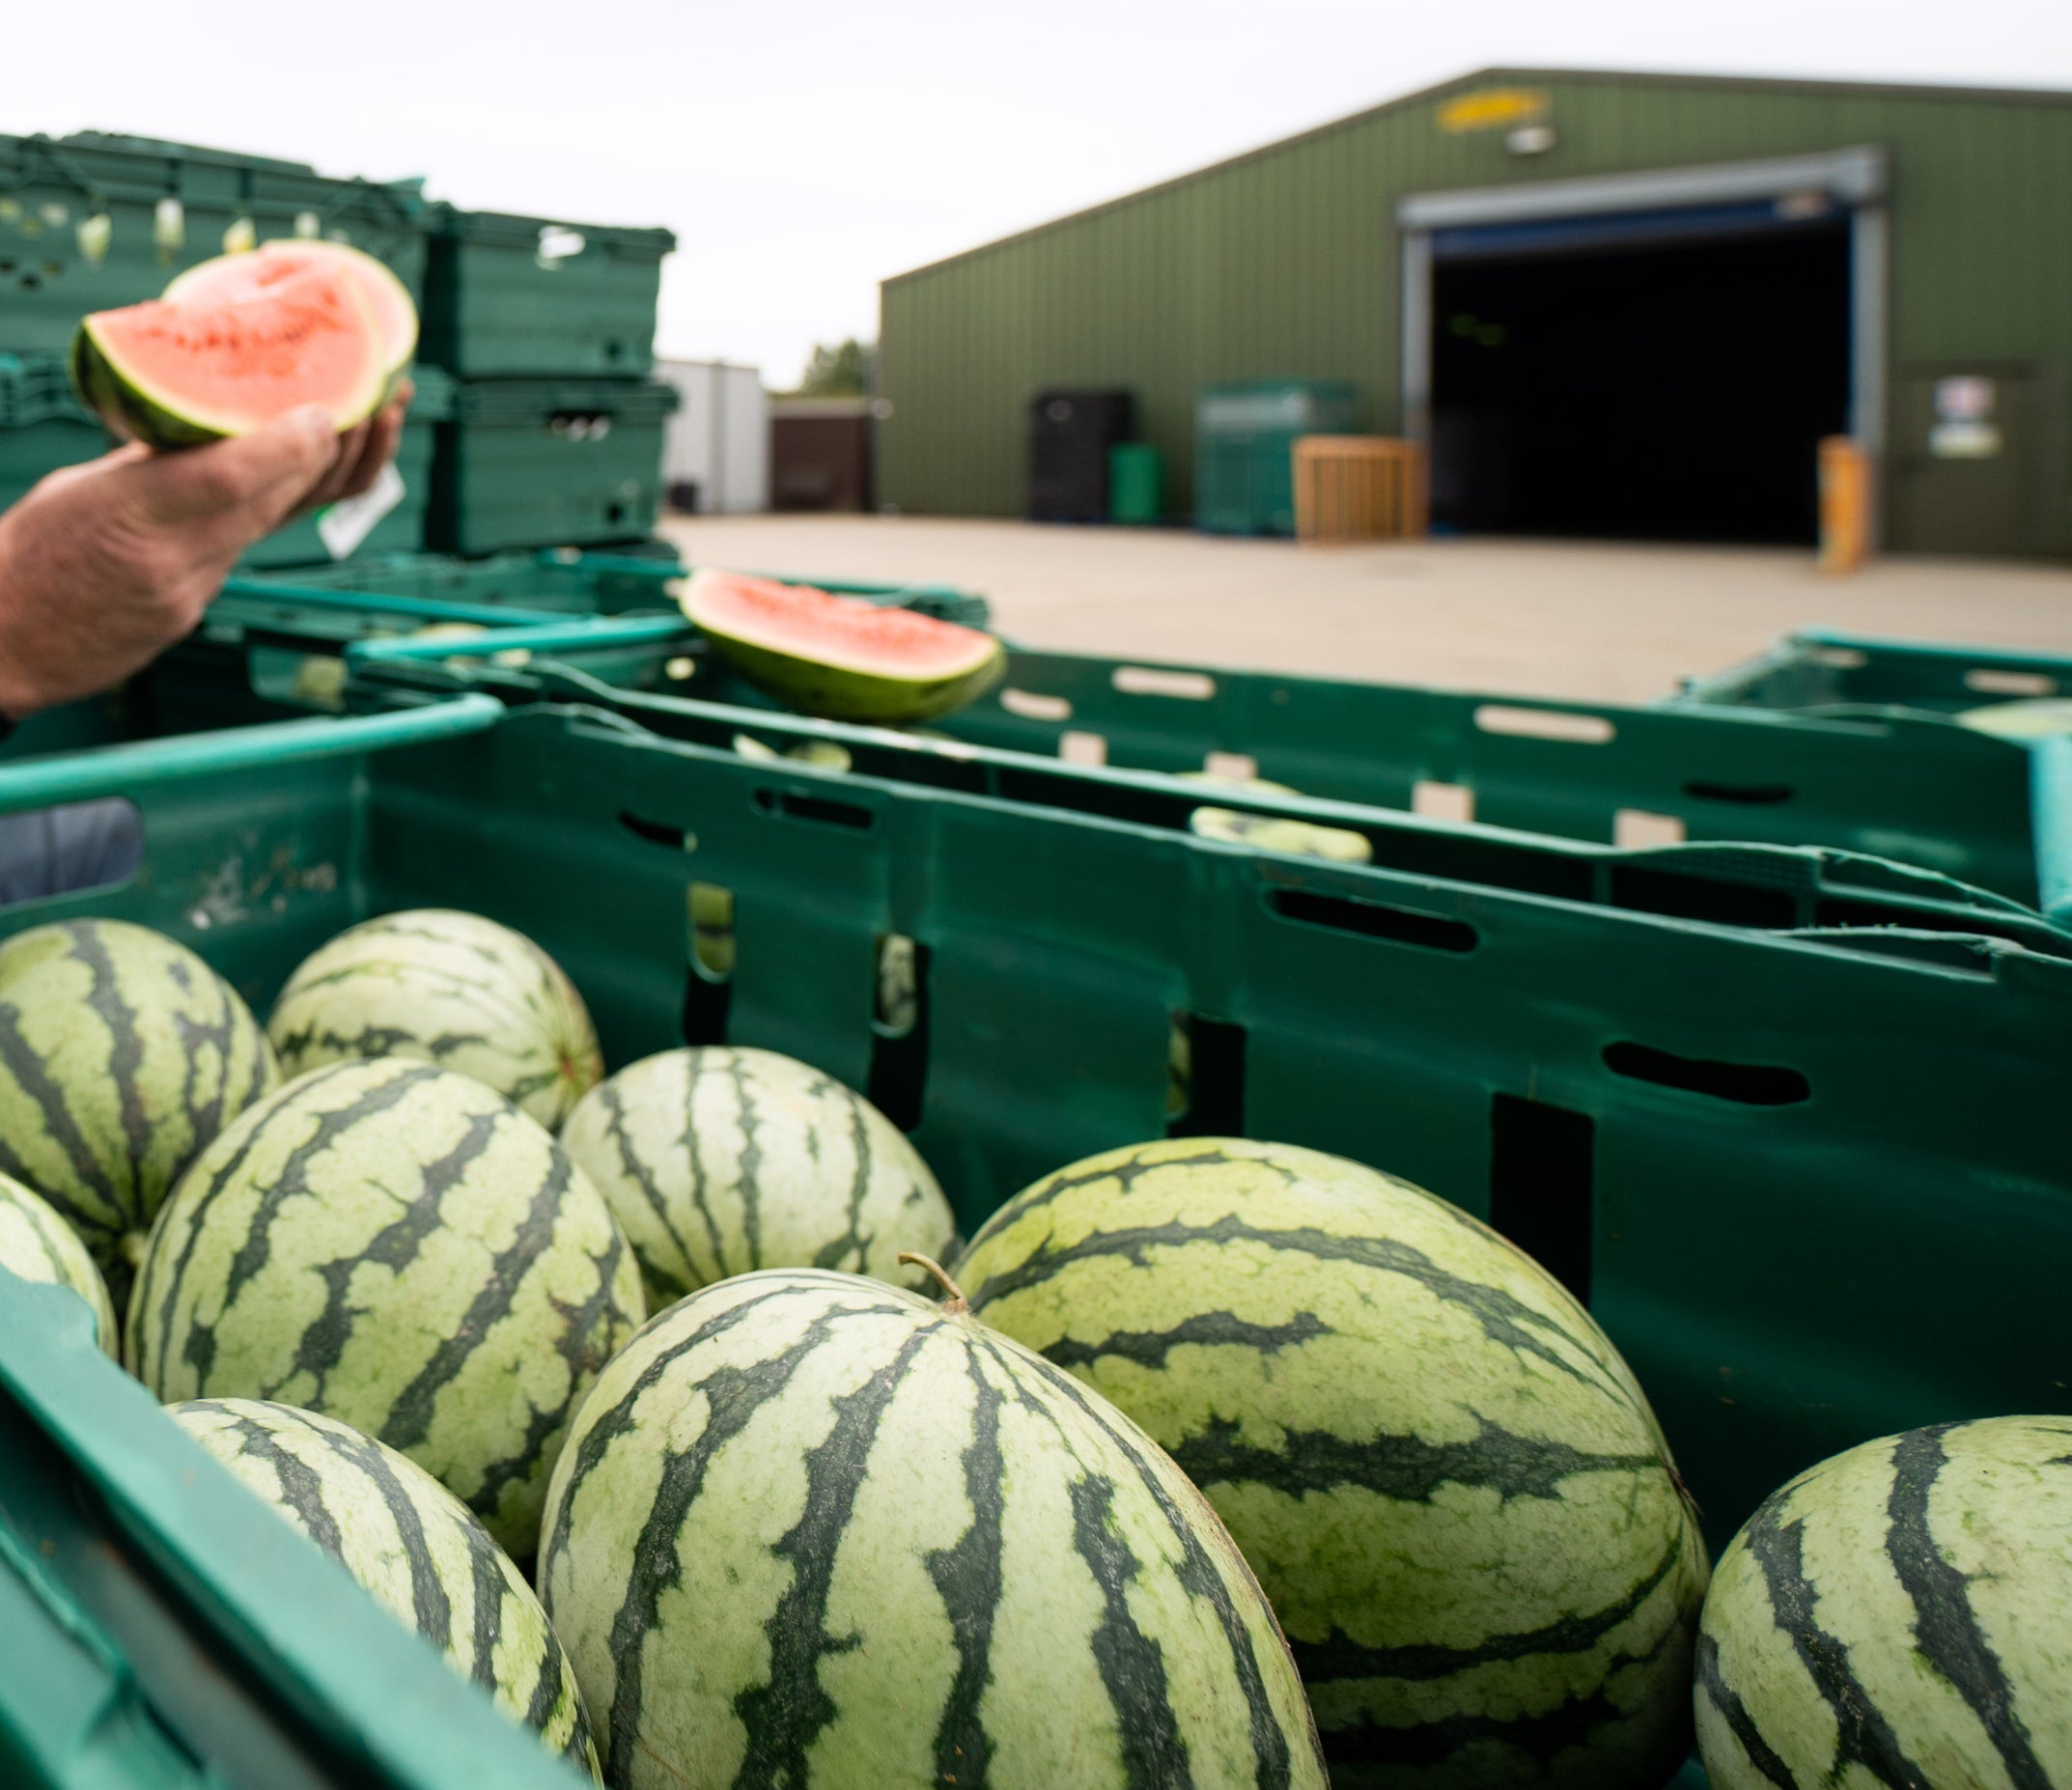 watermelons in a large crate at a farm facility